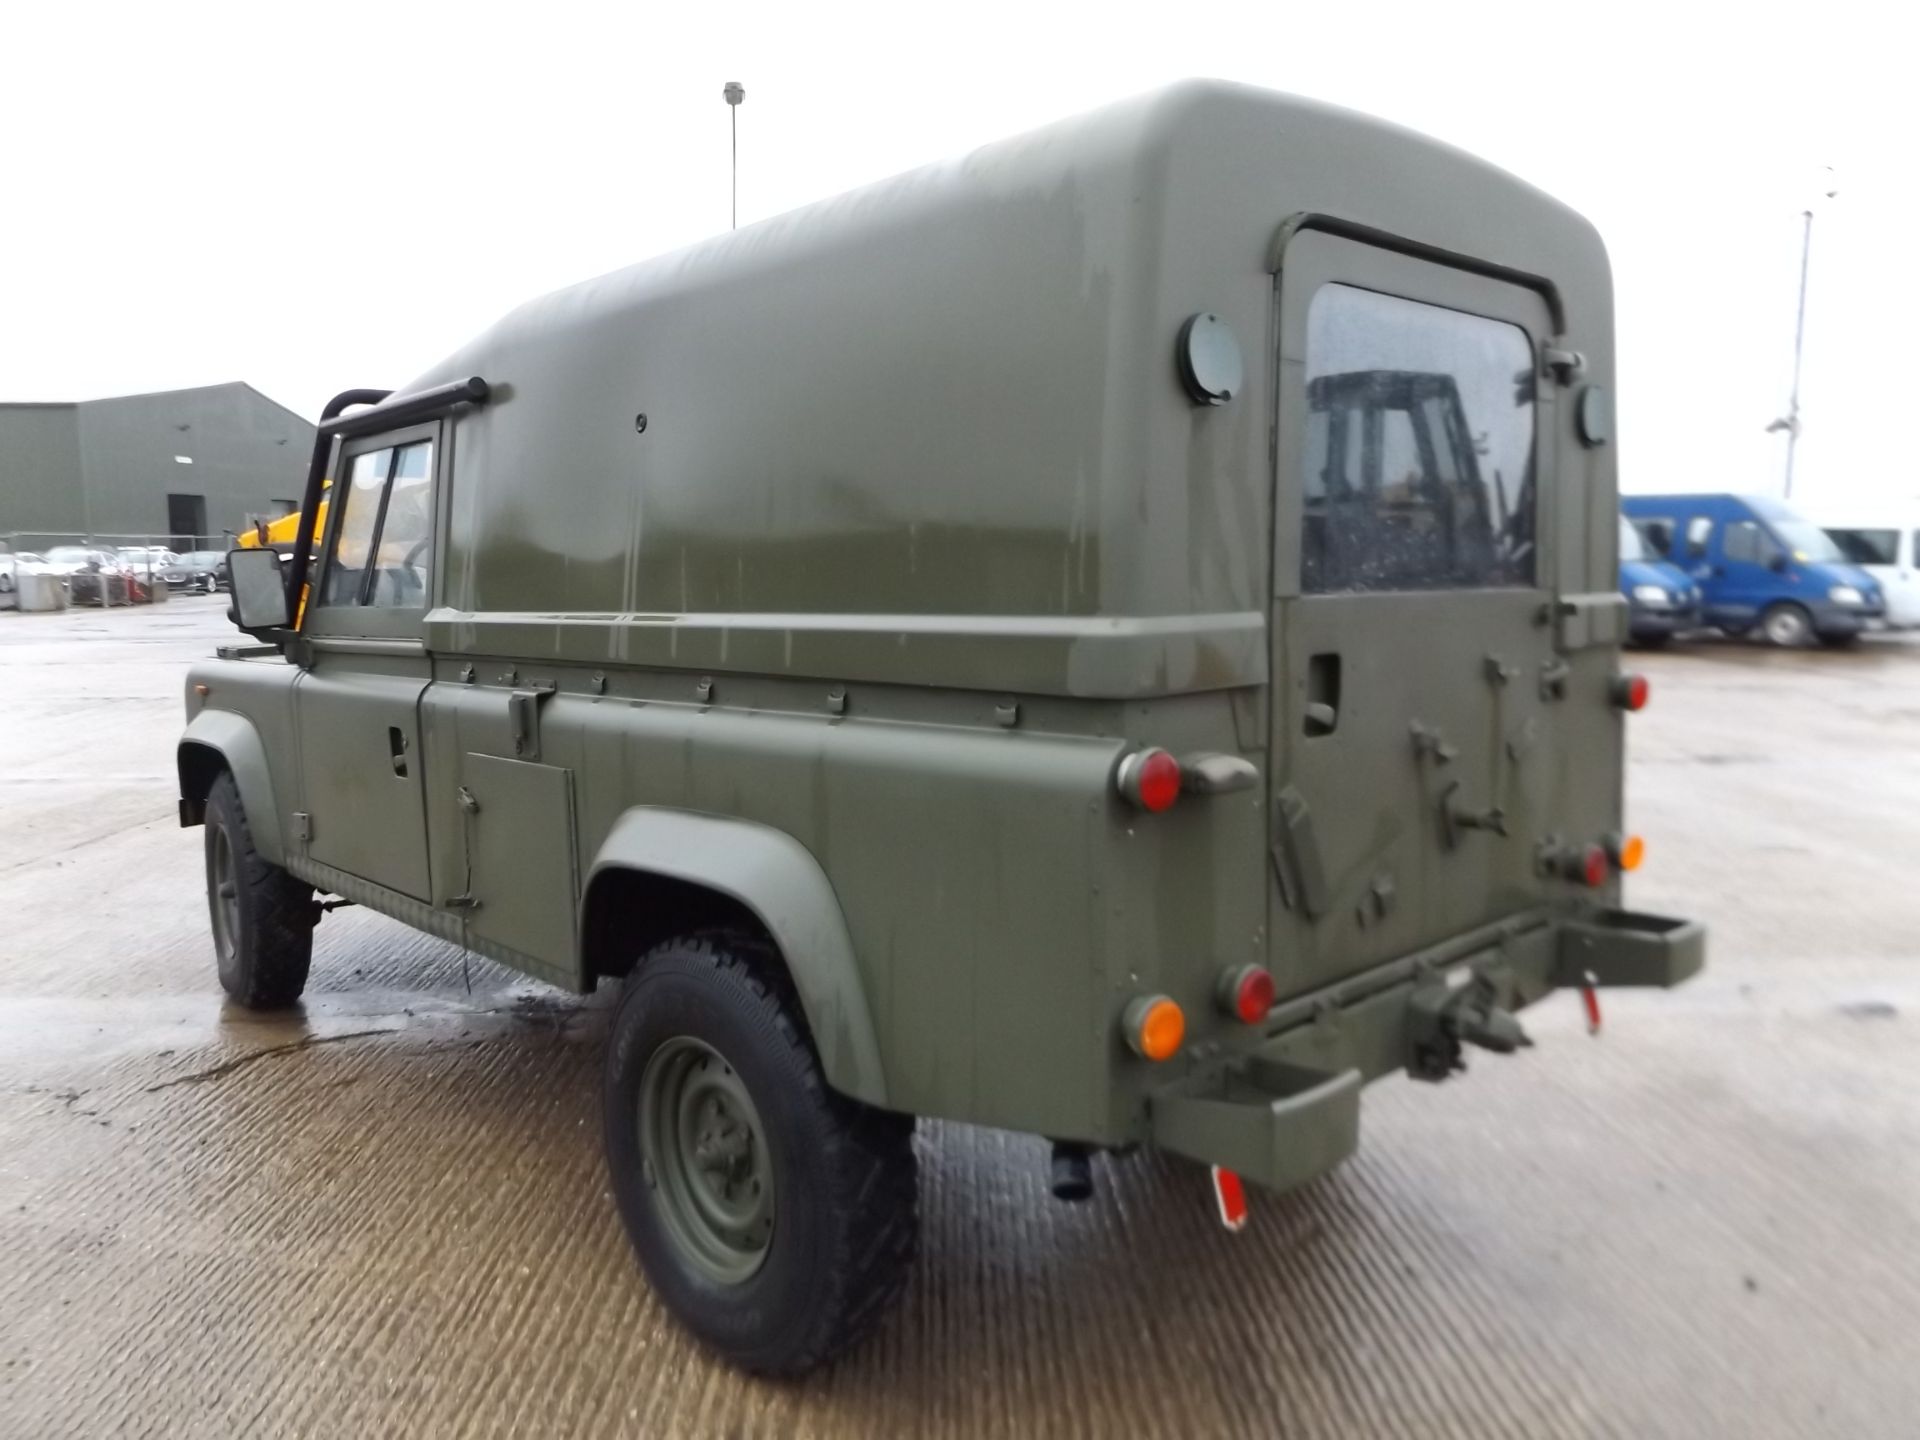 LHD Land Rover TITHONUS 110 Hard Top - Image 6 of 16